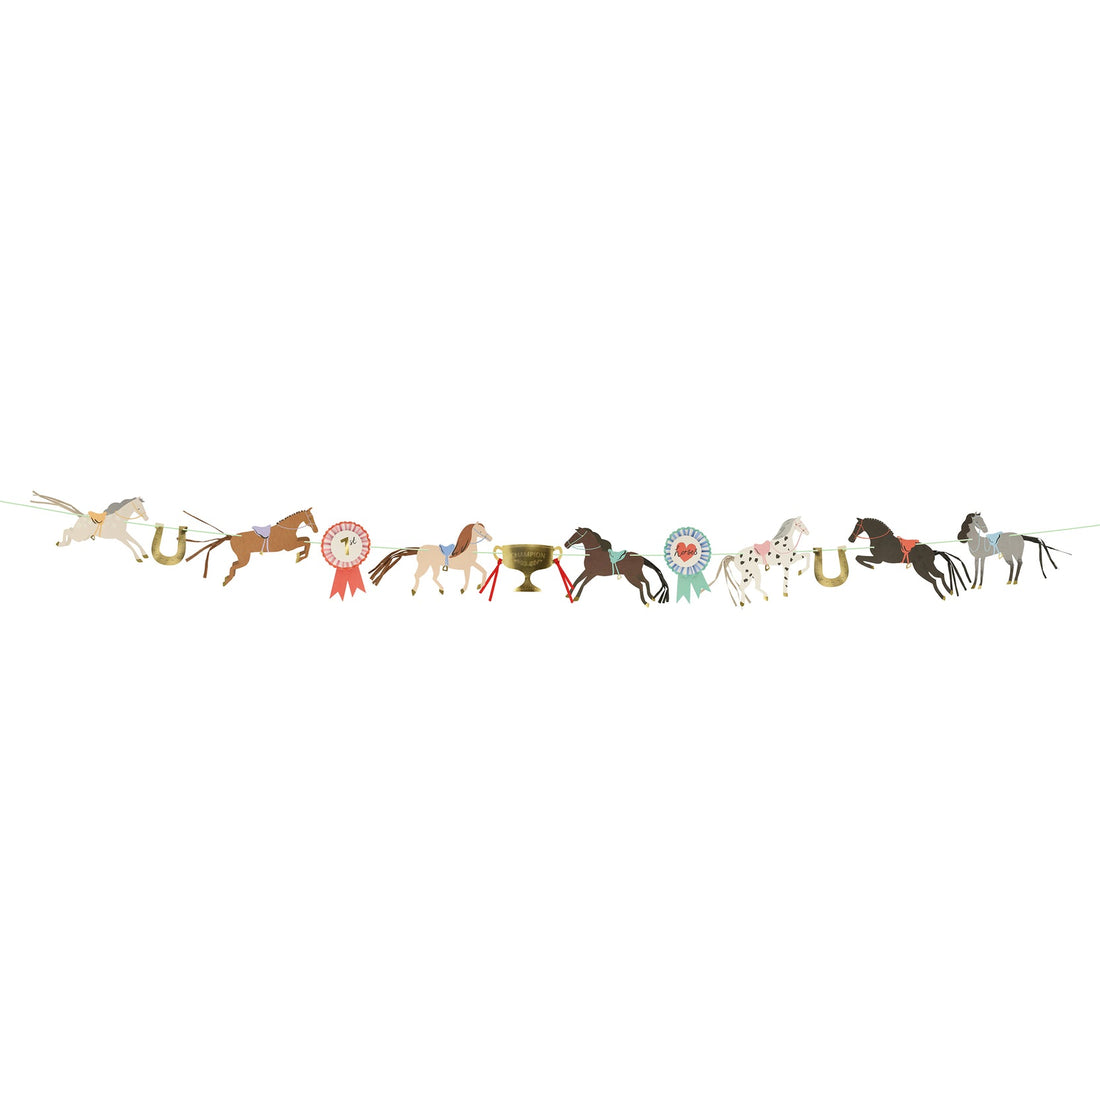 A row of Horse Garland on a white background decorated with Meri Meri garland.